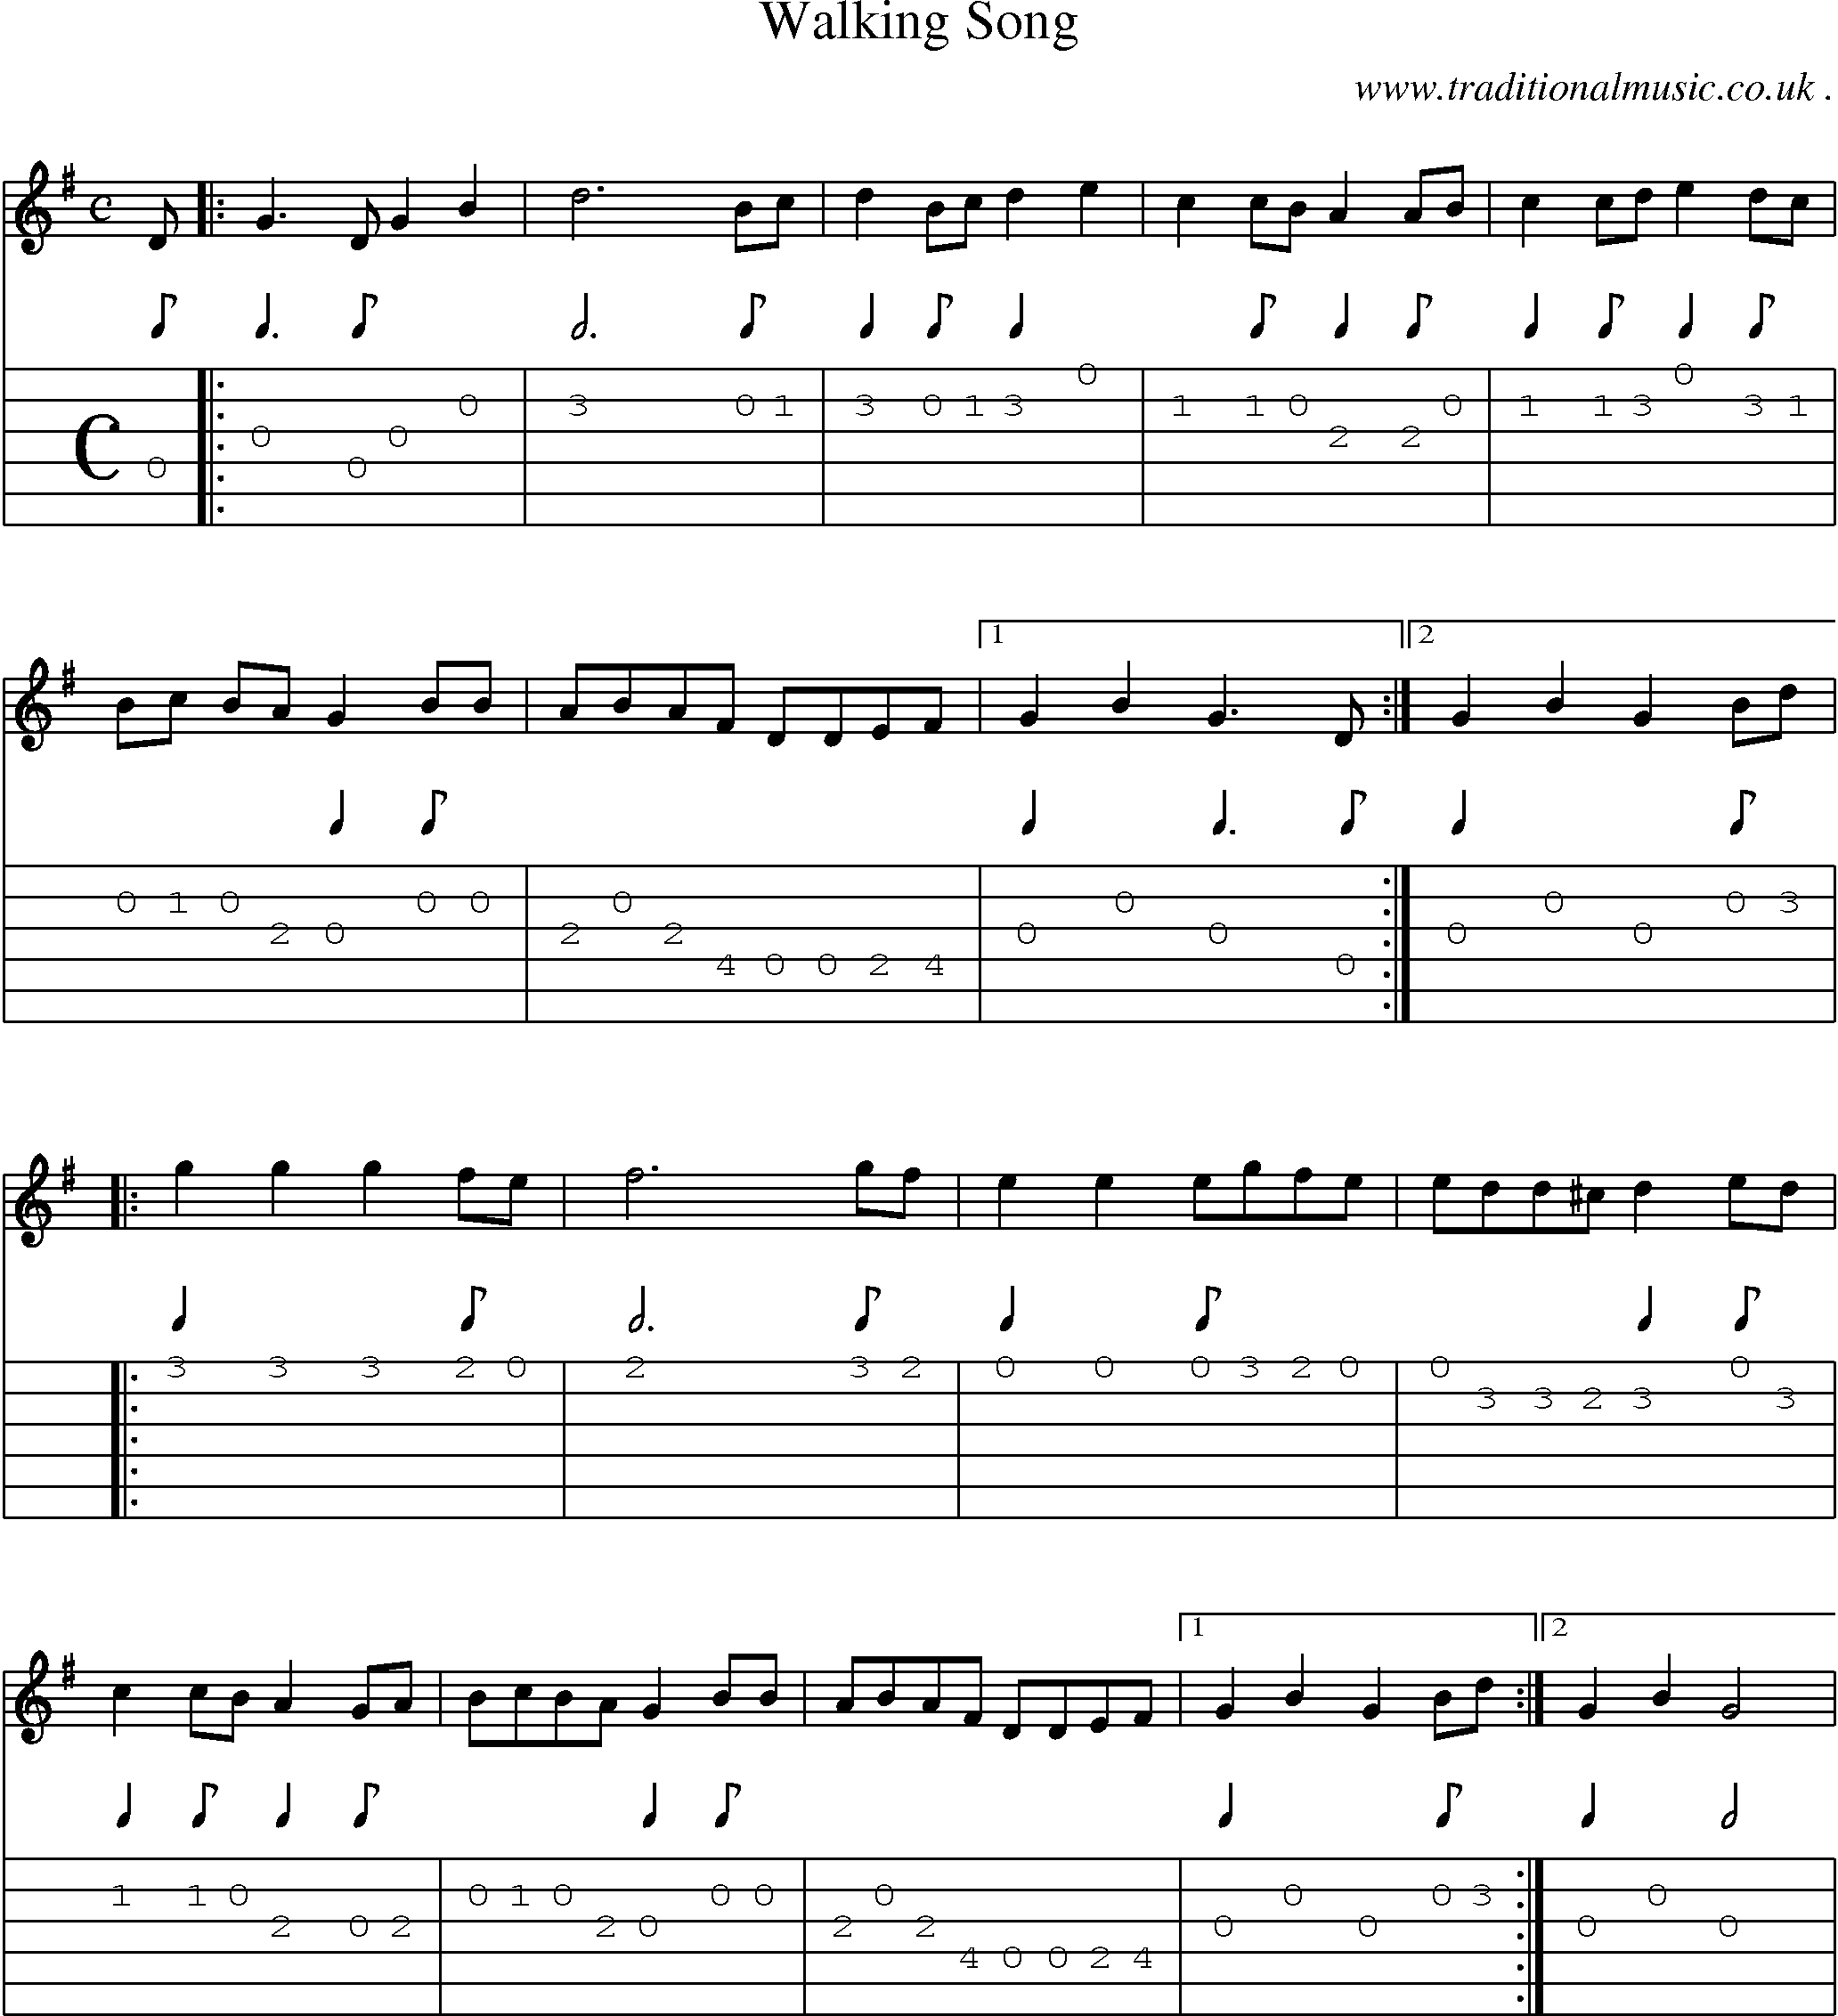 Sheet-Music and Guitar Tabs for Walking Song